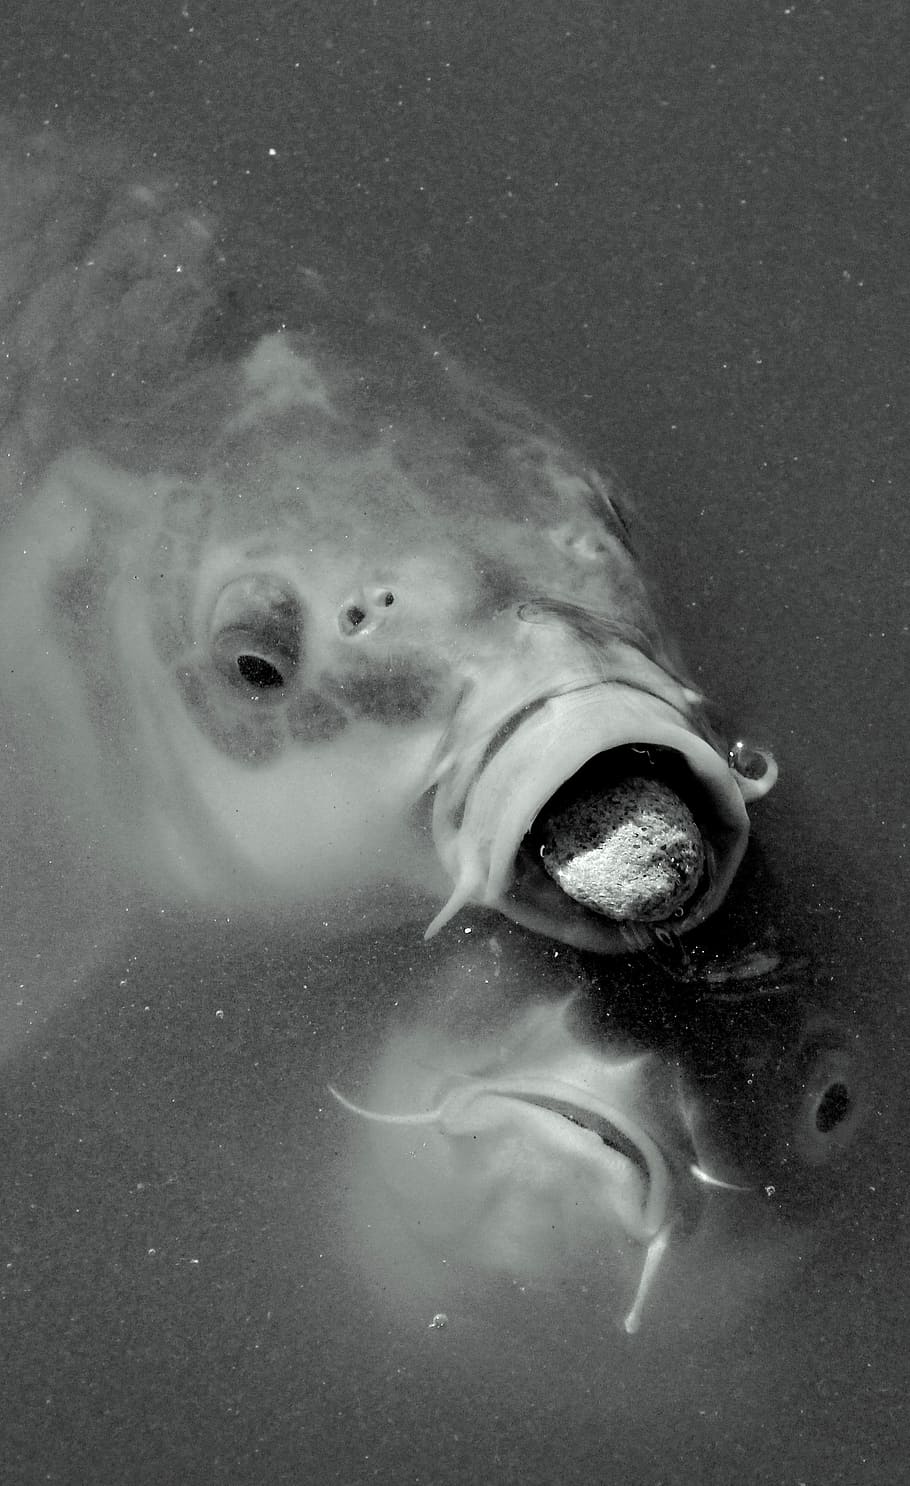 Fish, Fight, Win, Loss, Expression, win, loss, one person, underwater, looking at camera, water